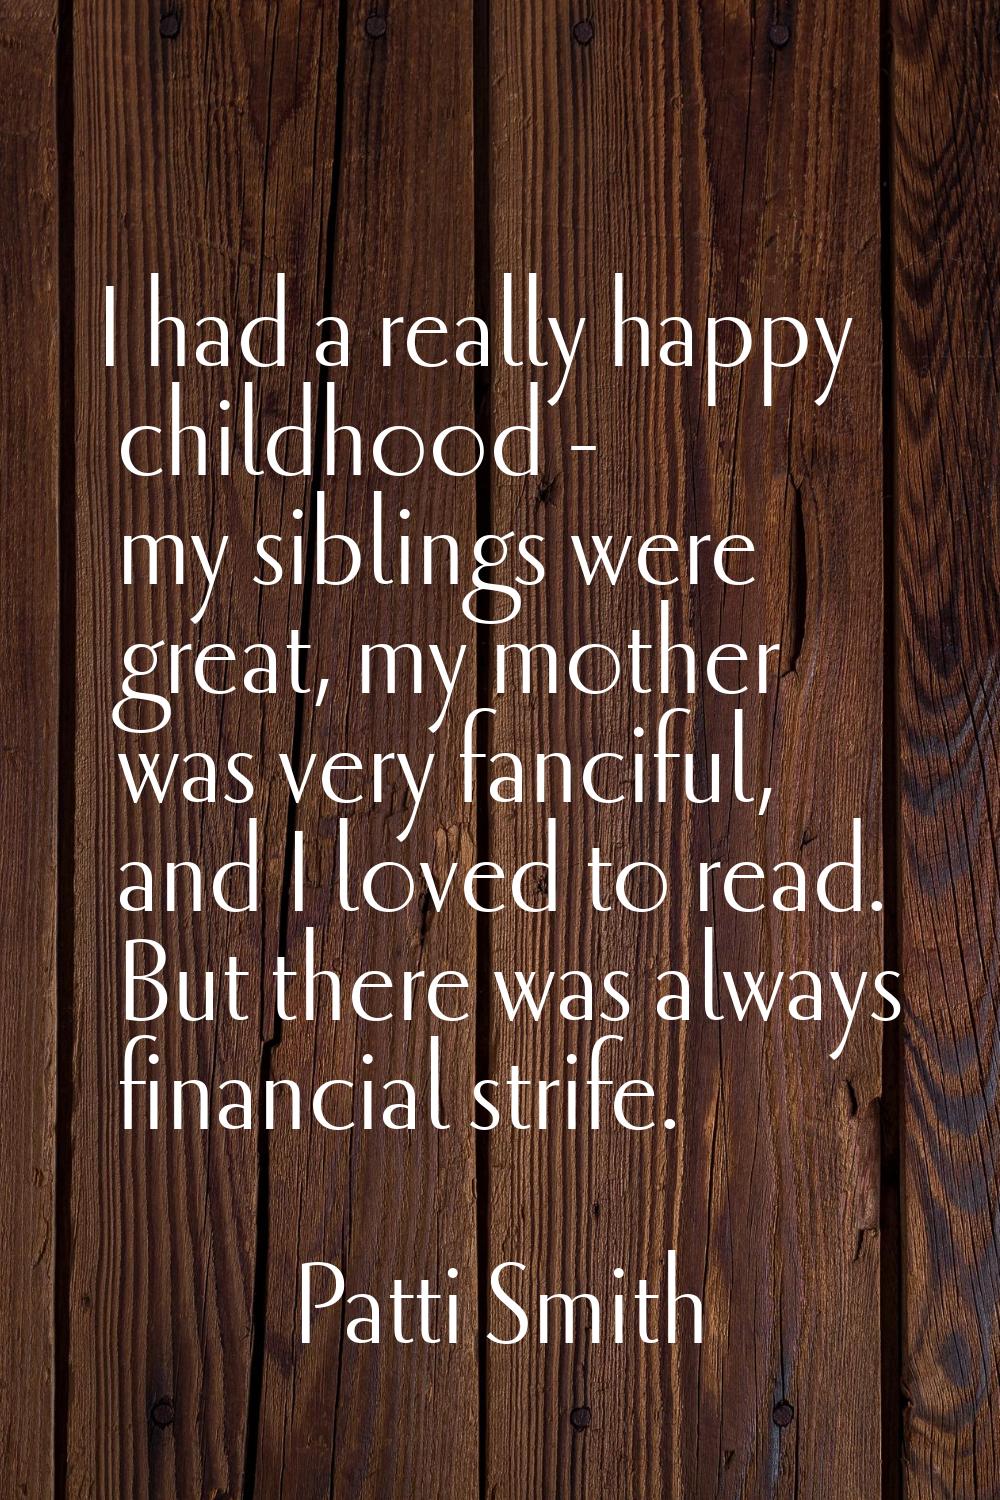 I had a really happy childhood - my siblings were great, my mother was very fanciful, and I loved t